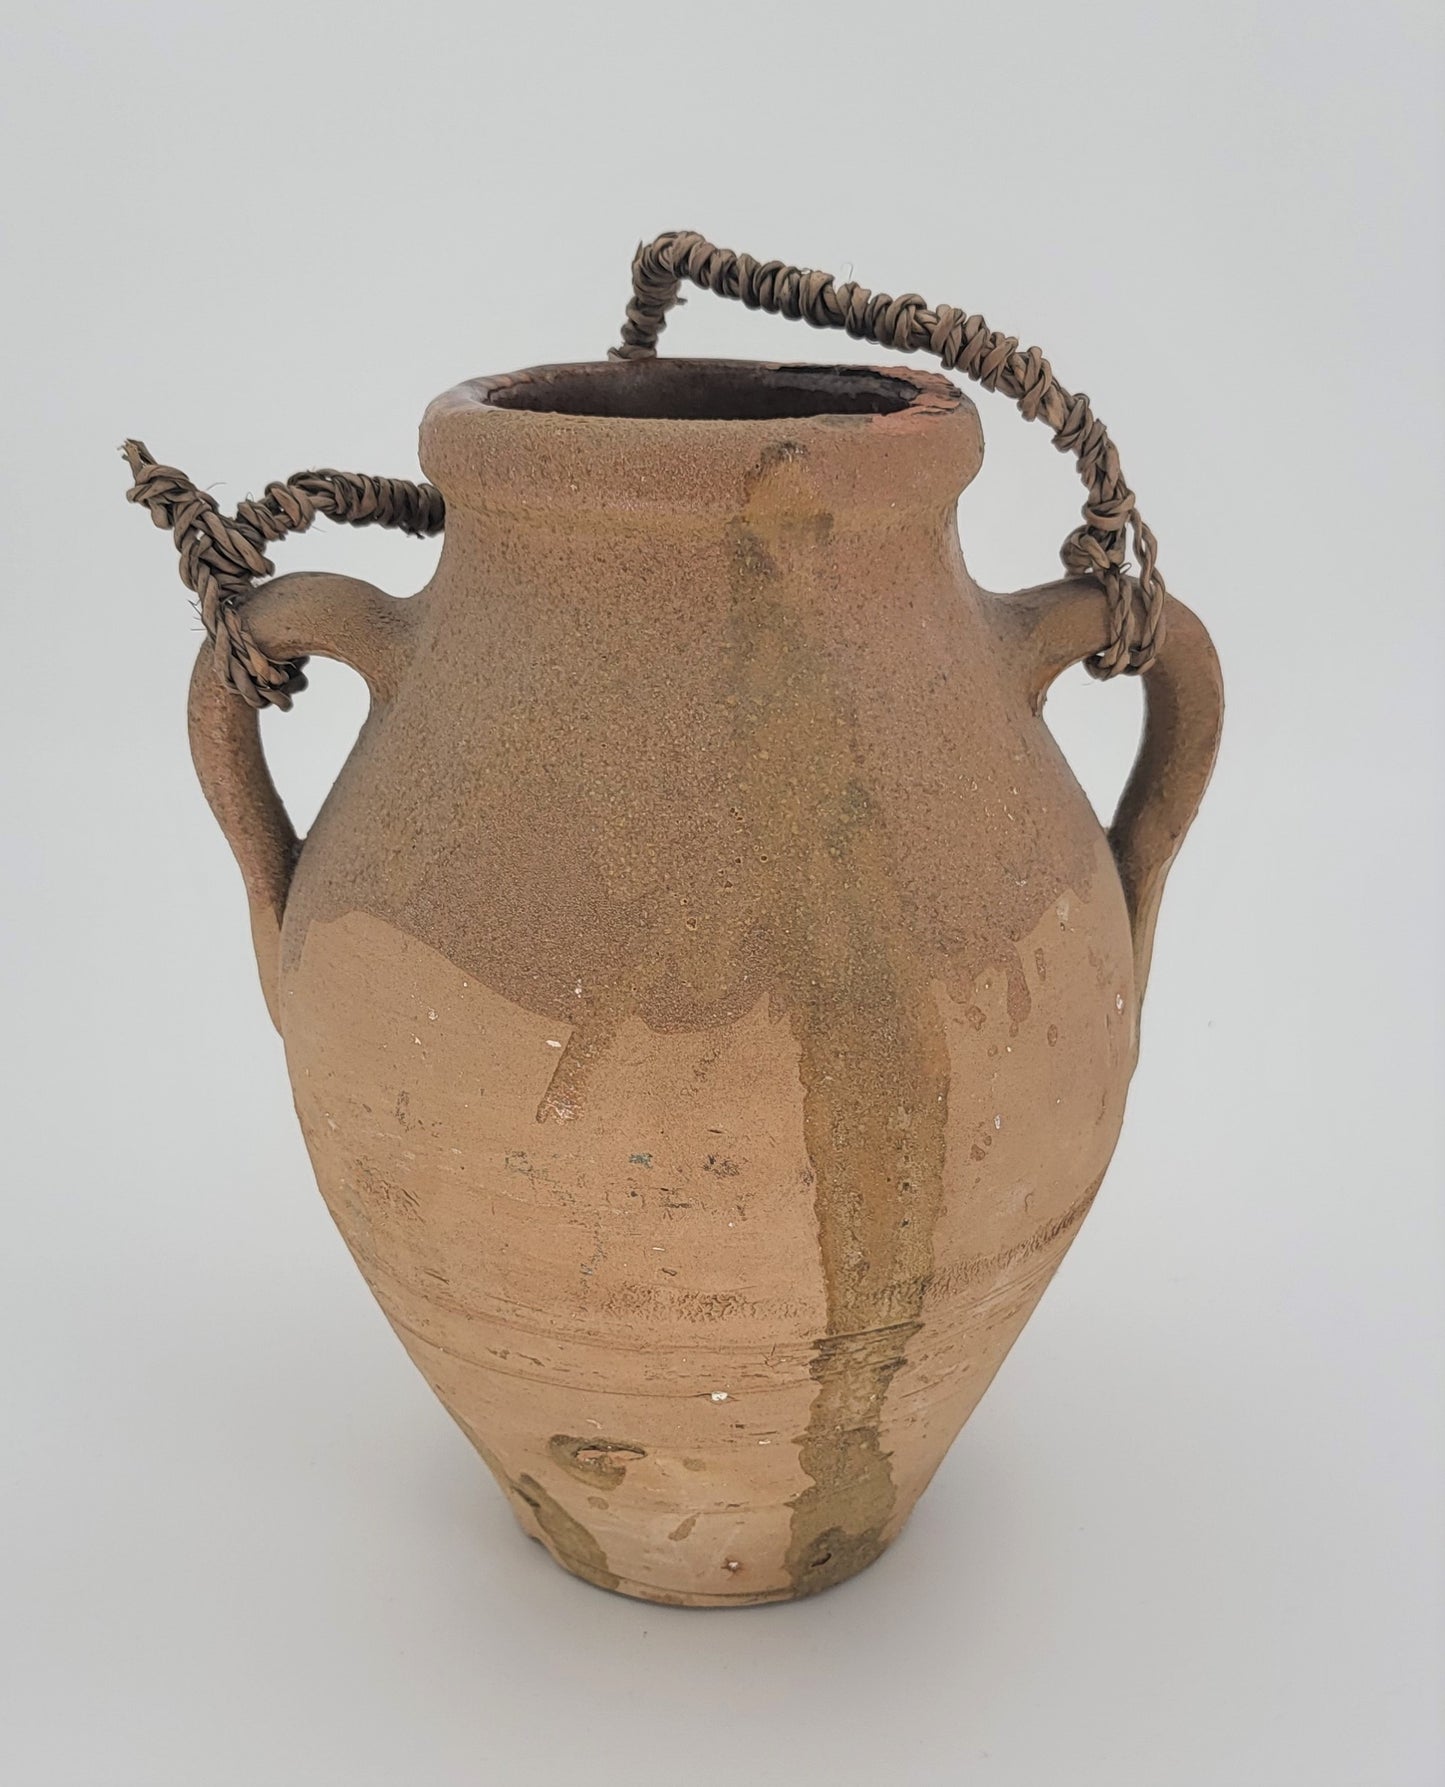 Moraccan Vase with Rope handle